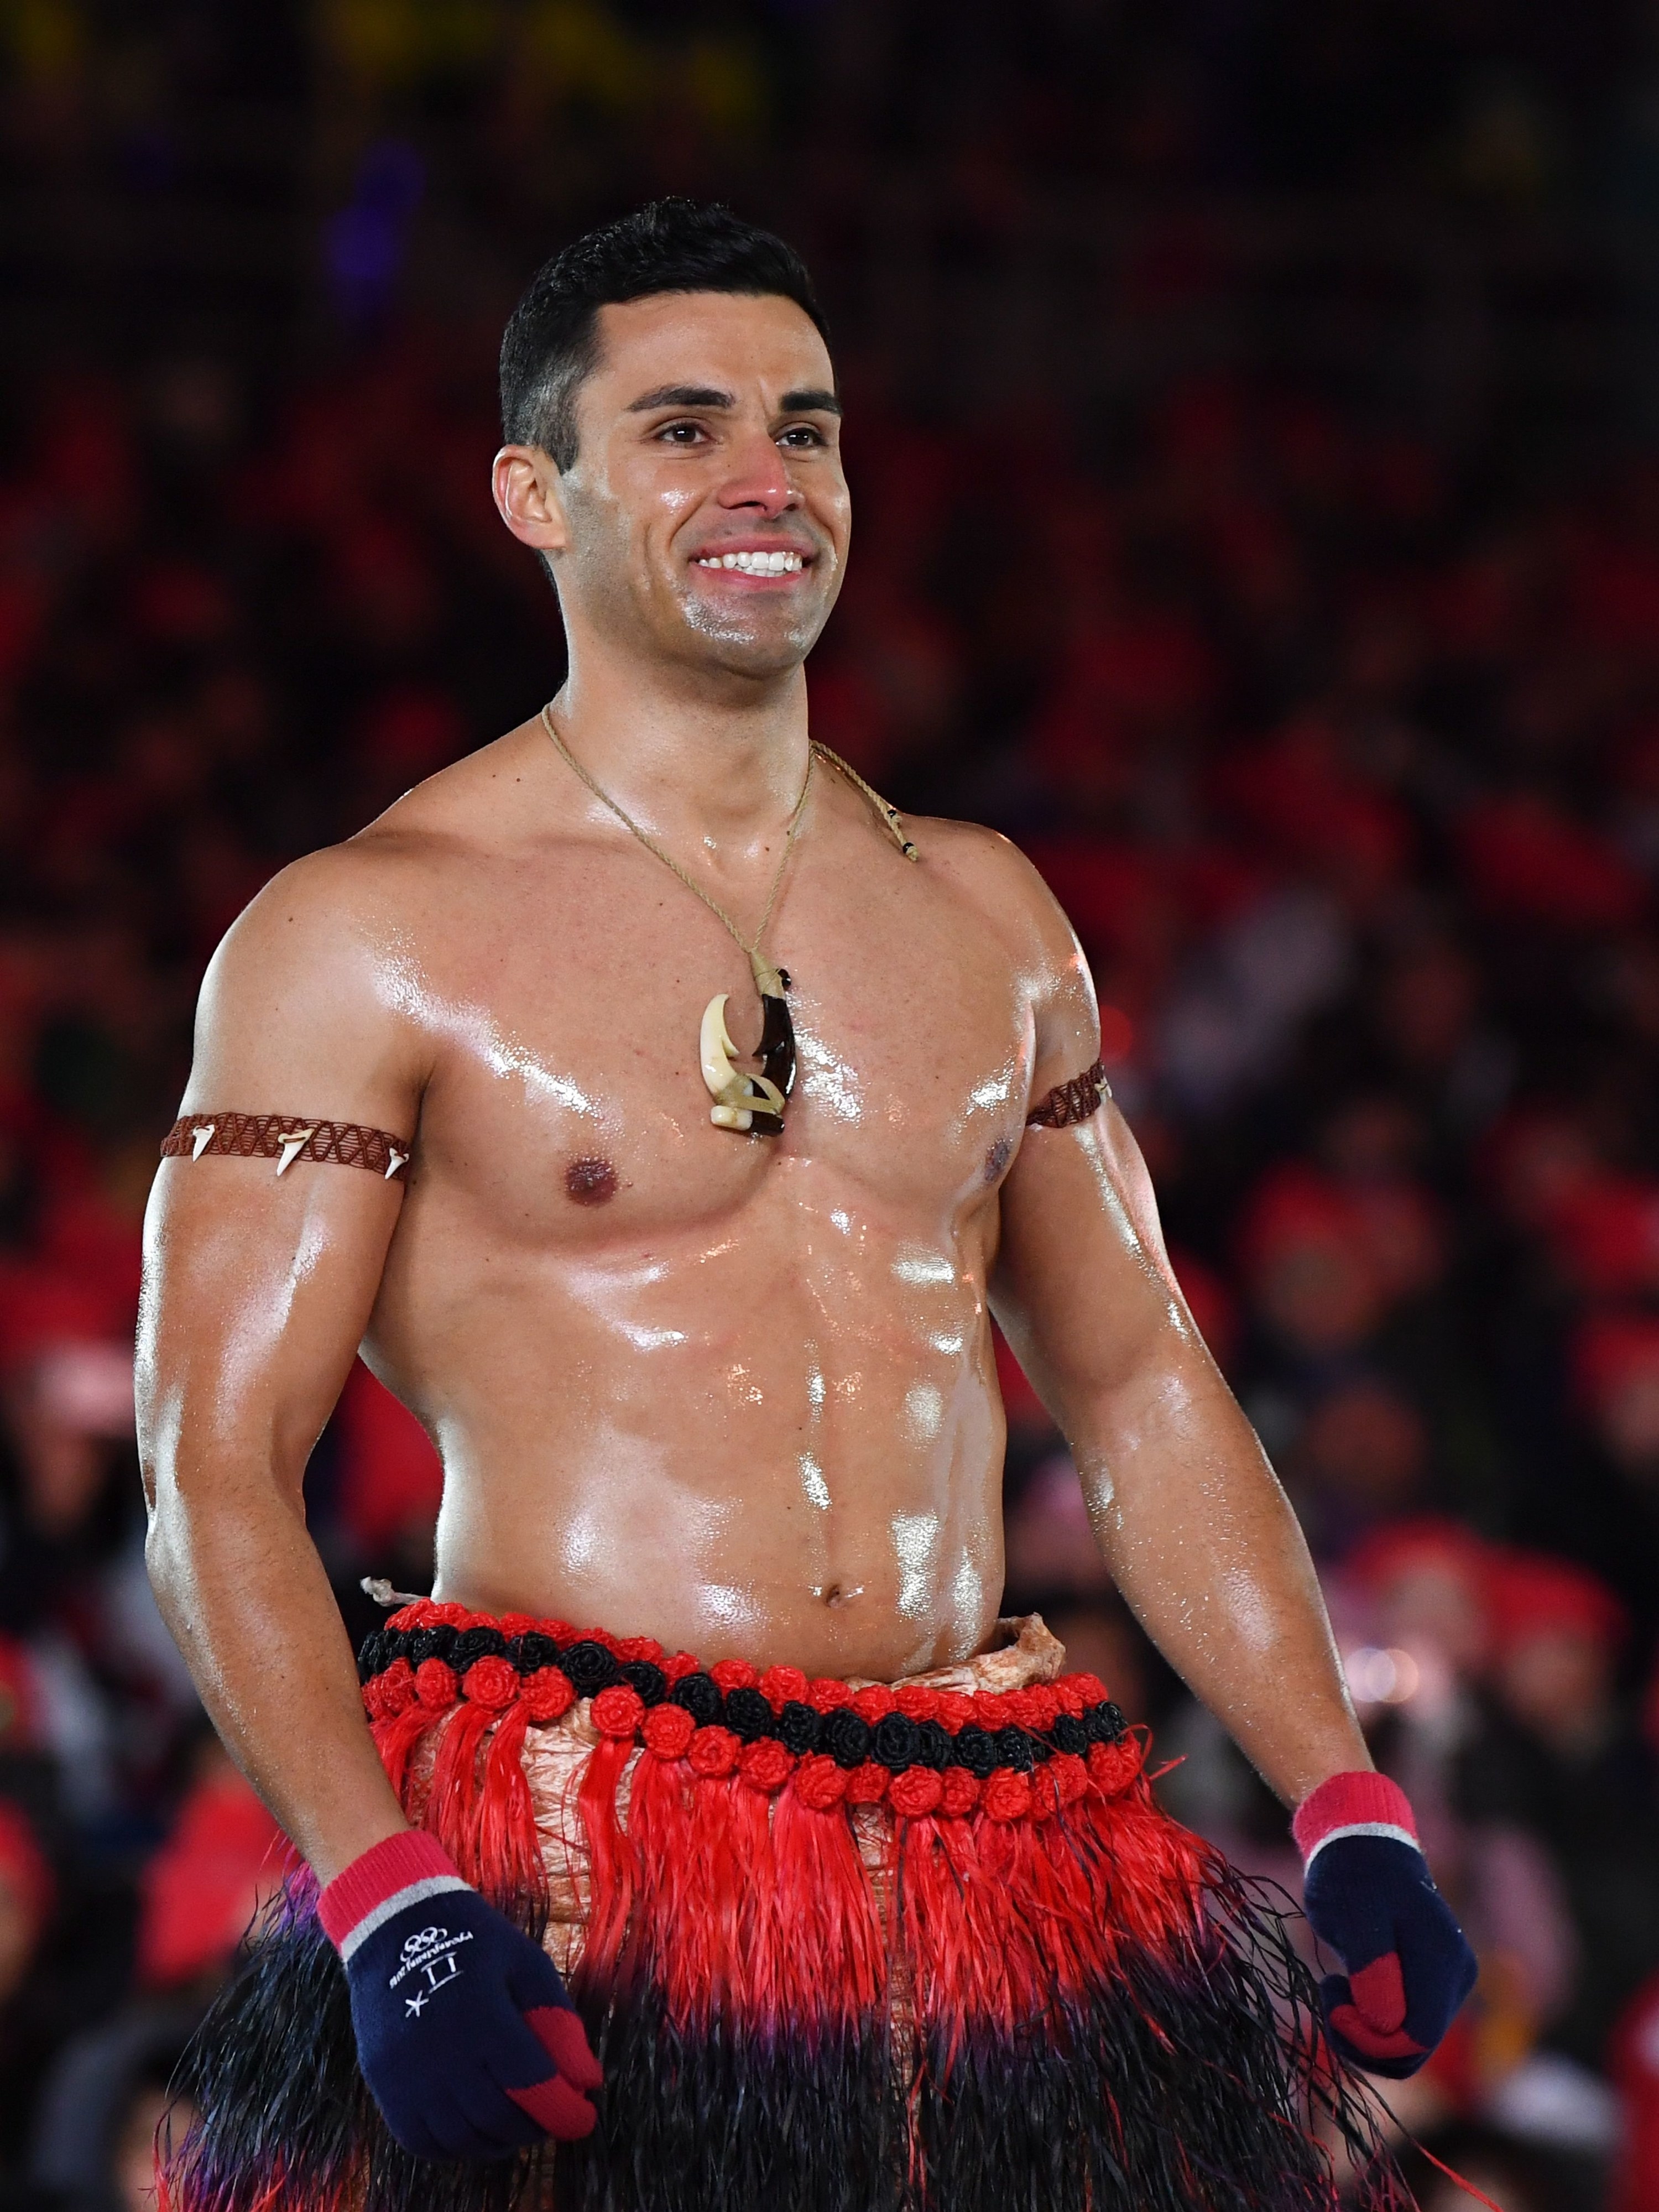 Pita Taufatofua is seen with an oily, muscled chest